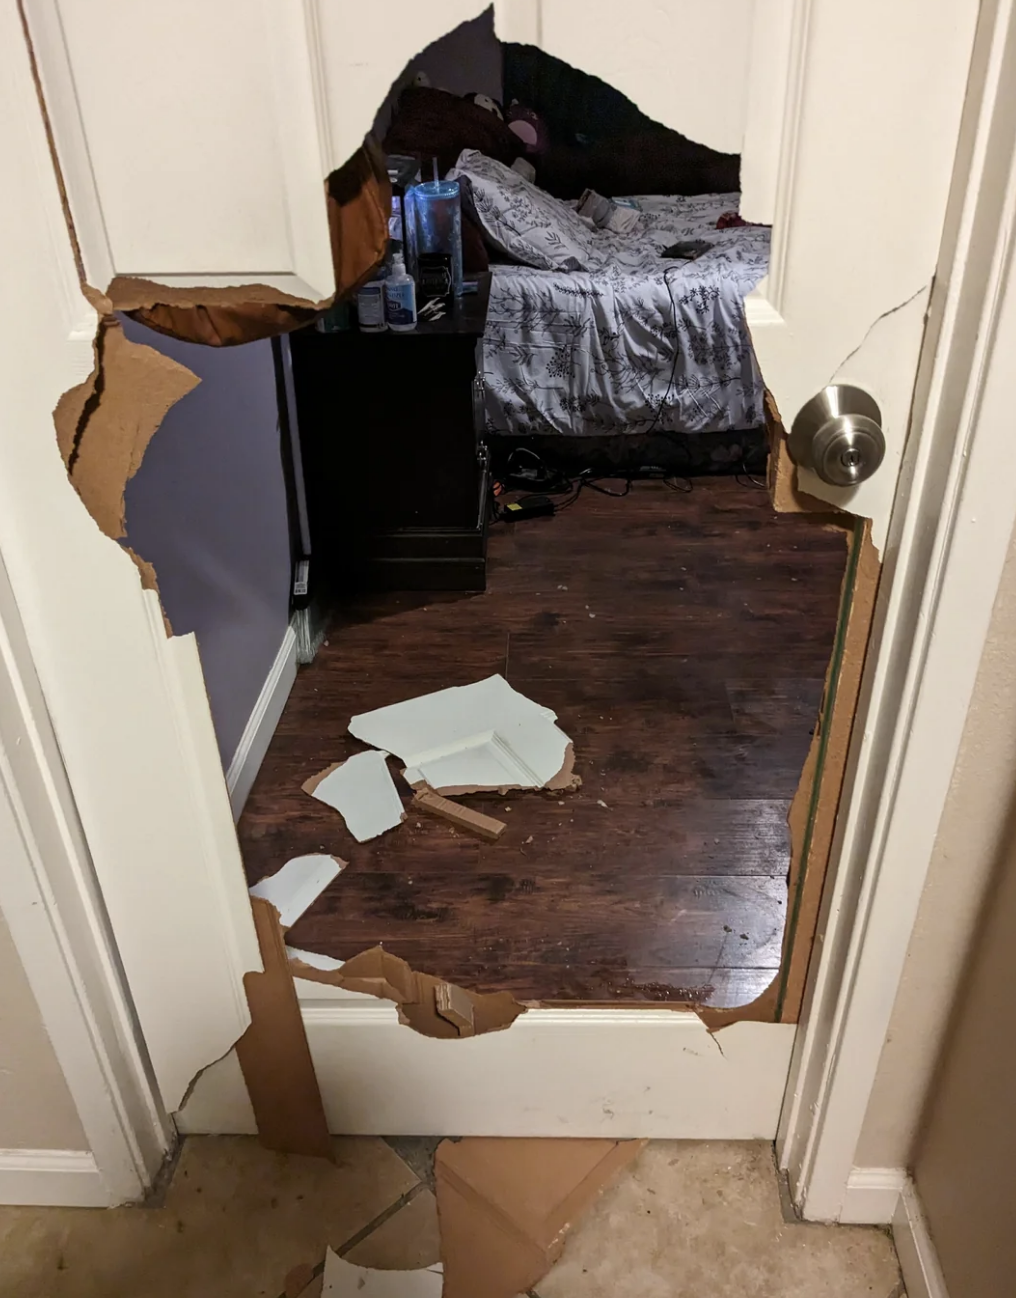 A damaged door with a large hole revealing a room with a bed and scattered debris on the floor